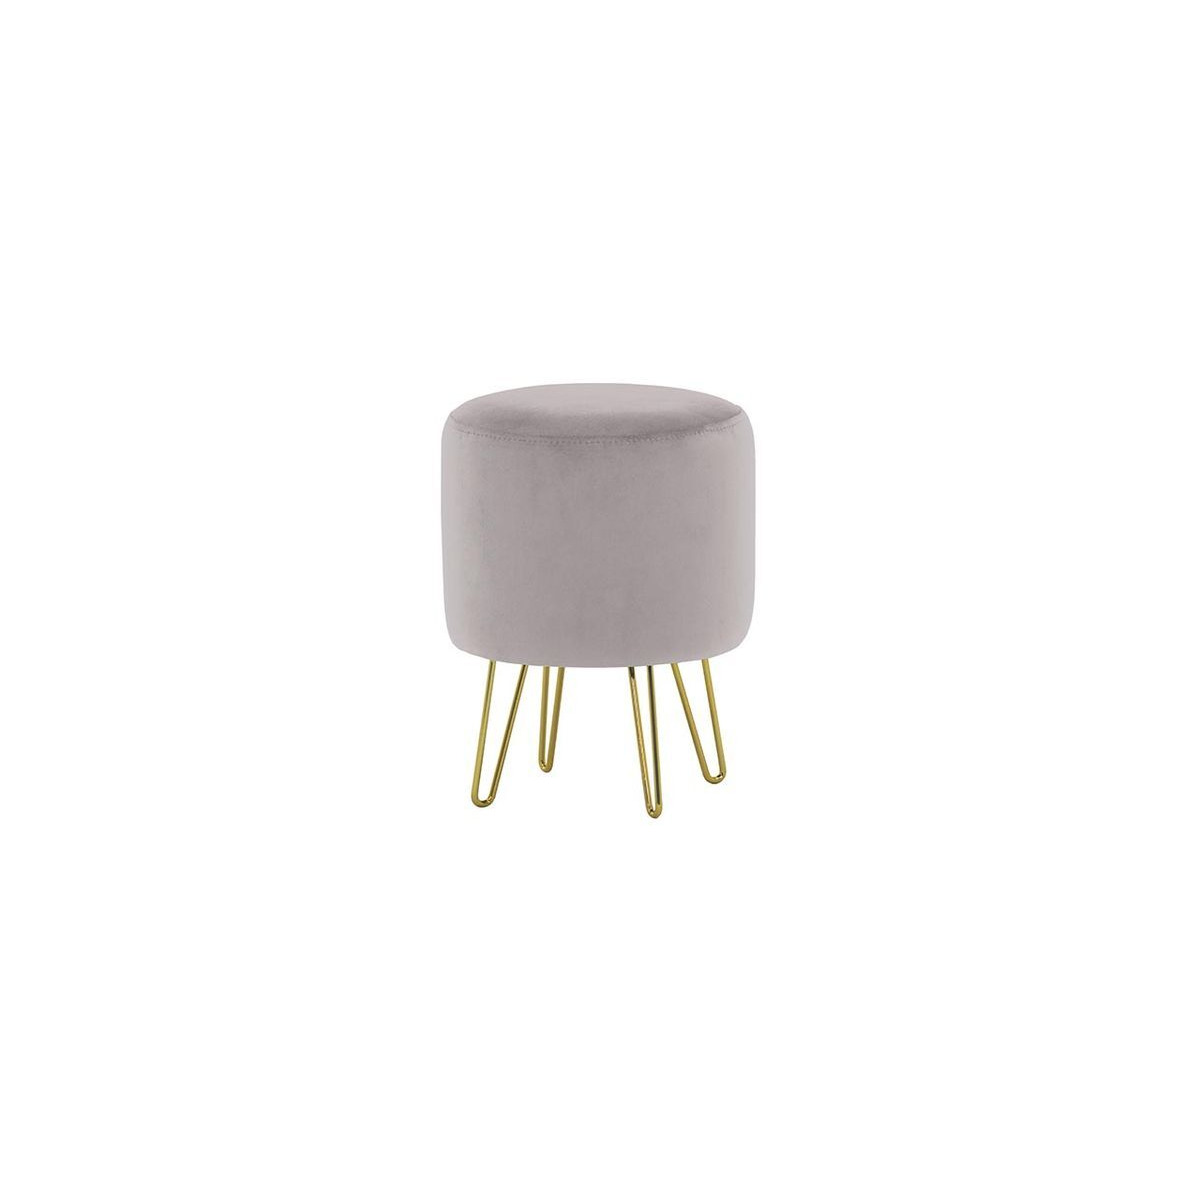 Flair Small Round Pouffe Metal Legs, silver - image 1